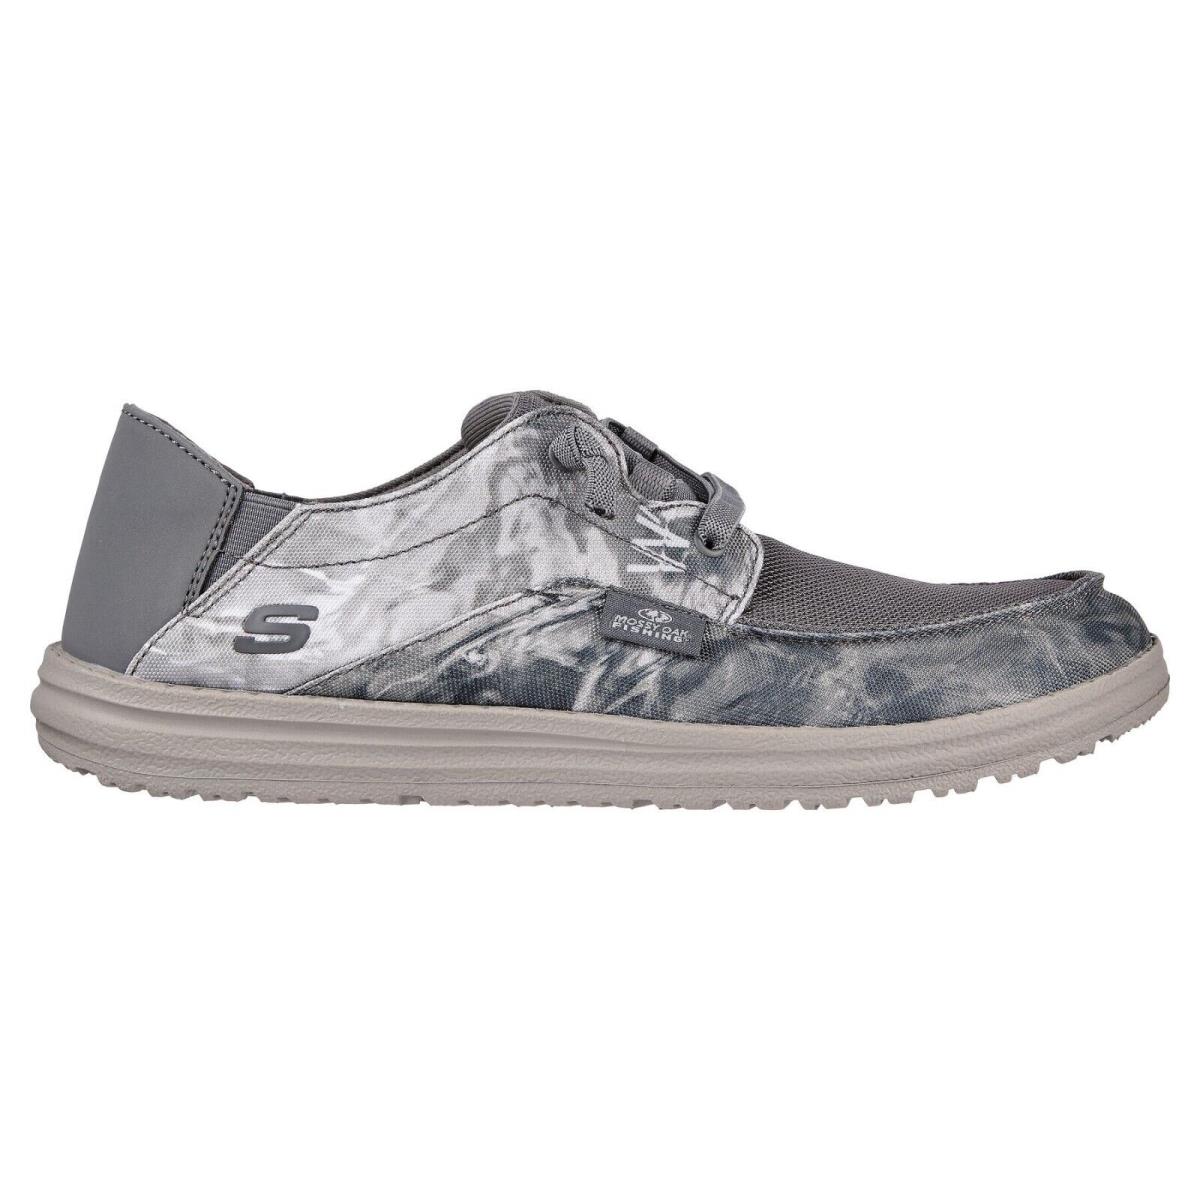 Skechers shoes Melson Topher - Gray 10